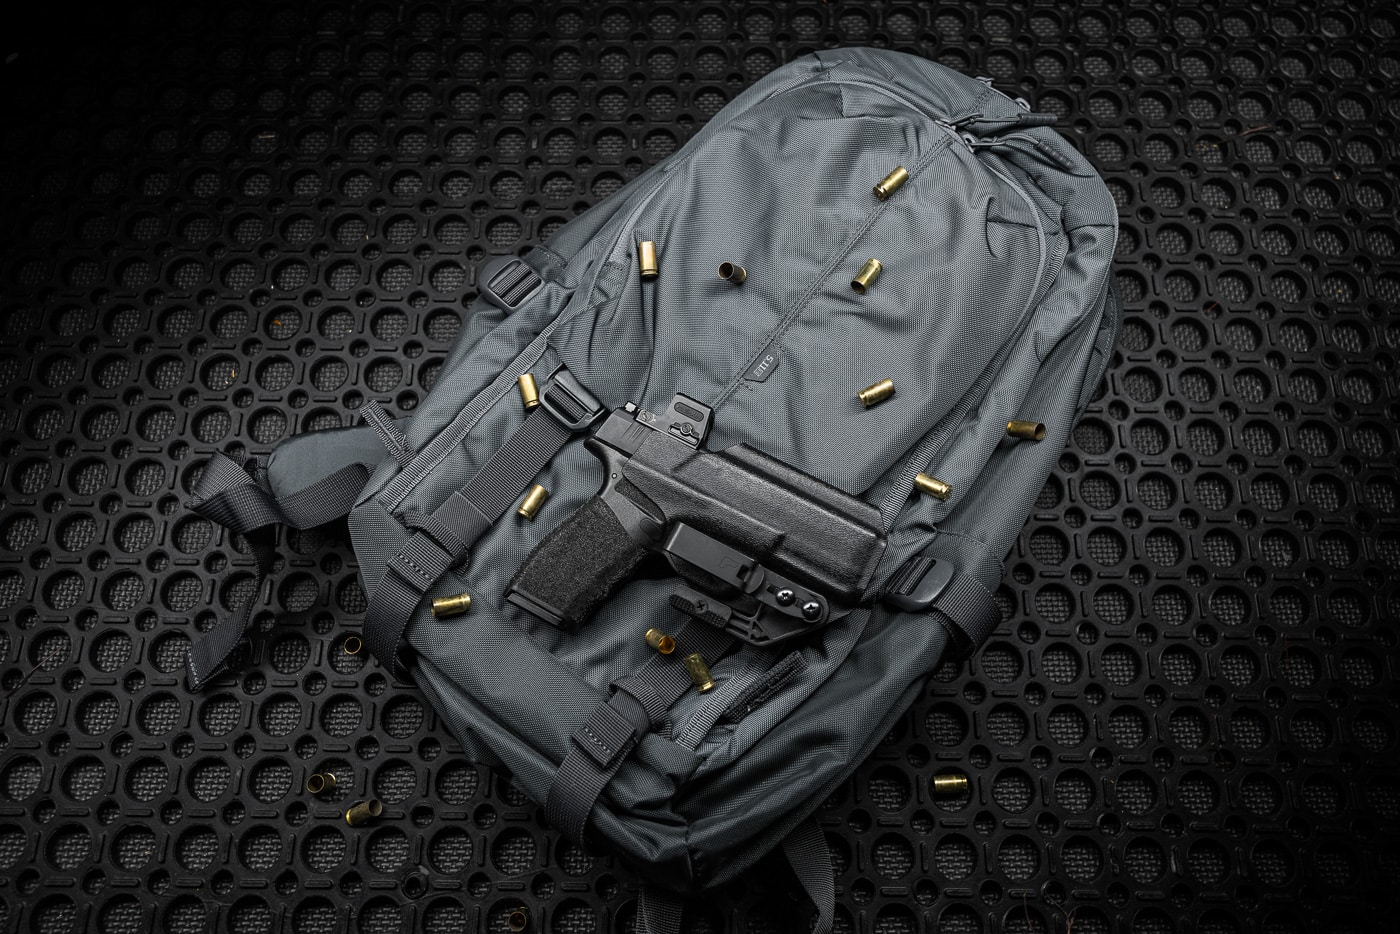 5.11 LV18 Backpack Review - this EPIC Gray Man EDC / CCW Pack is a hidden  gem! 